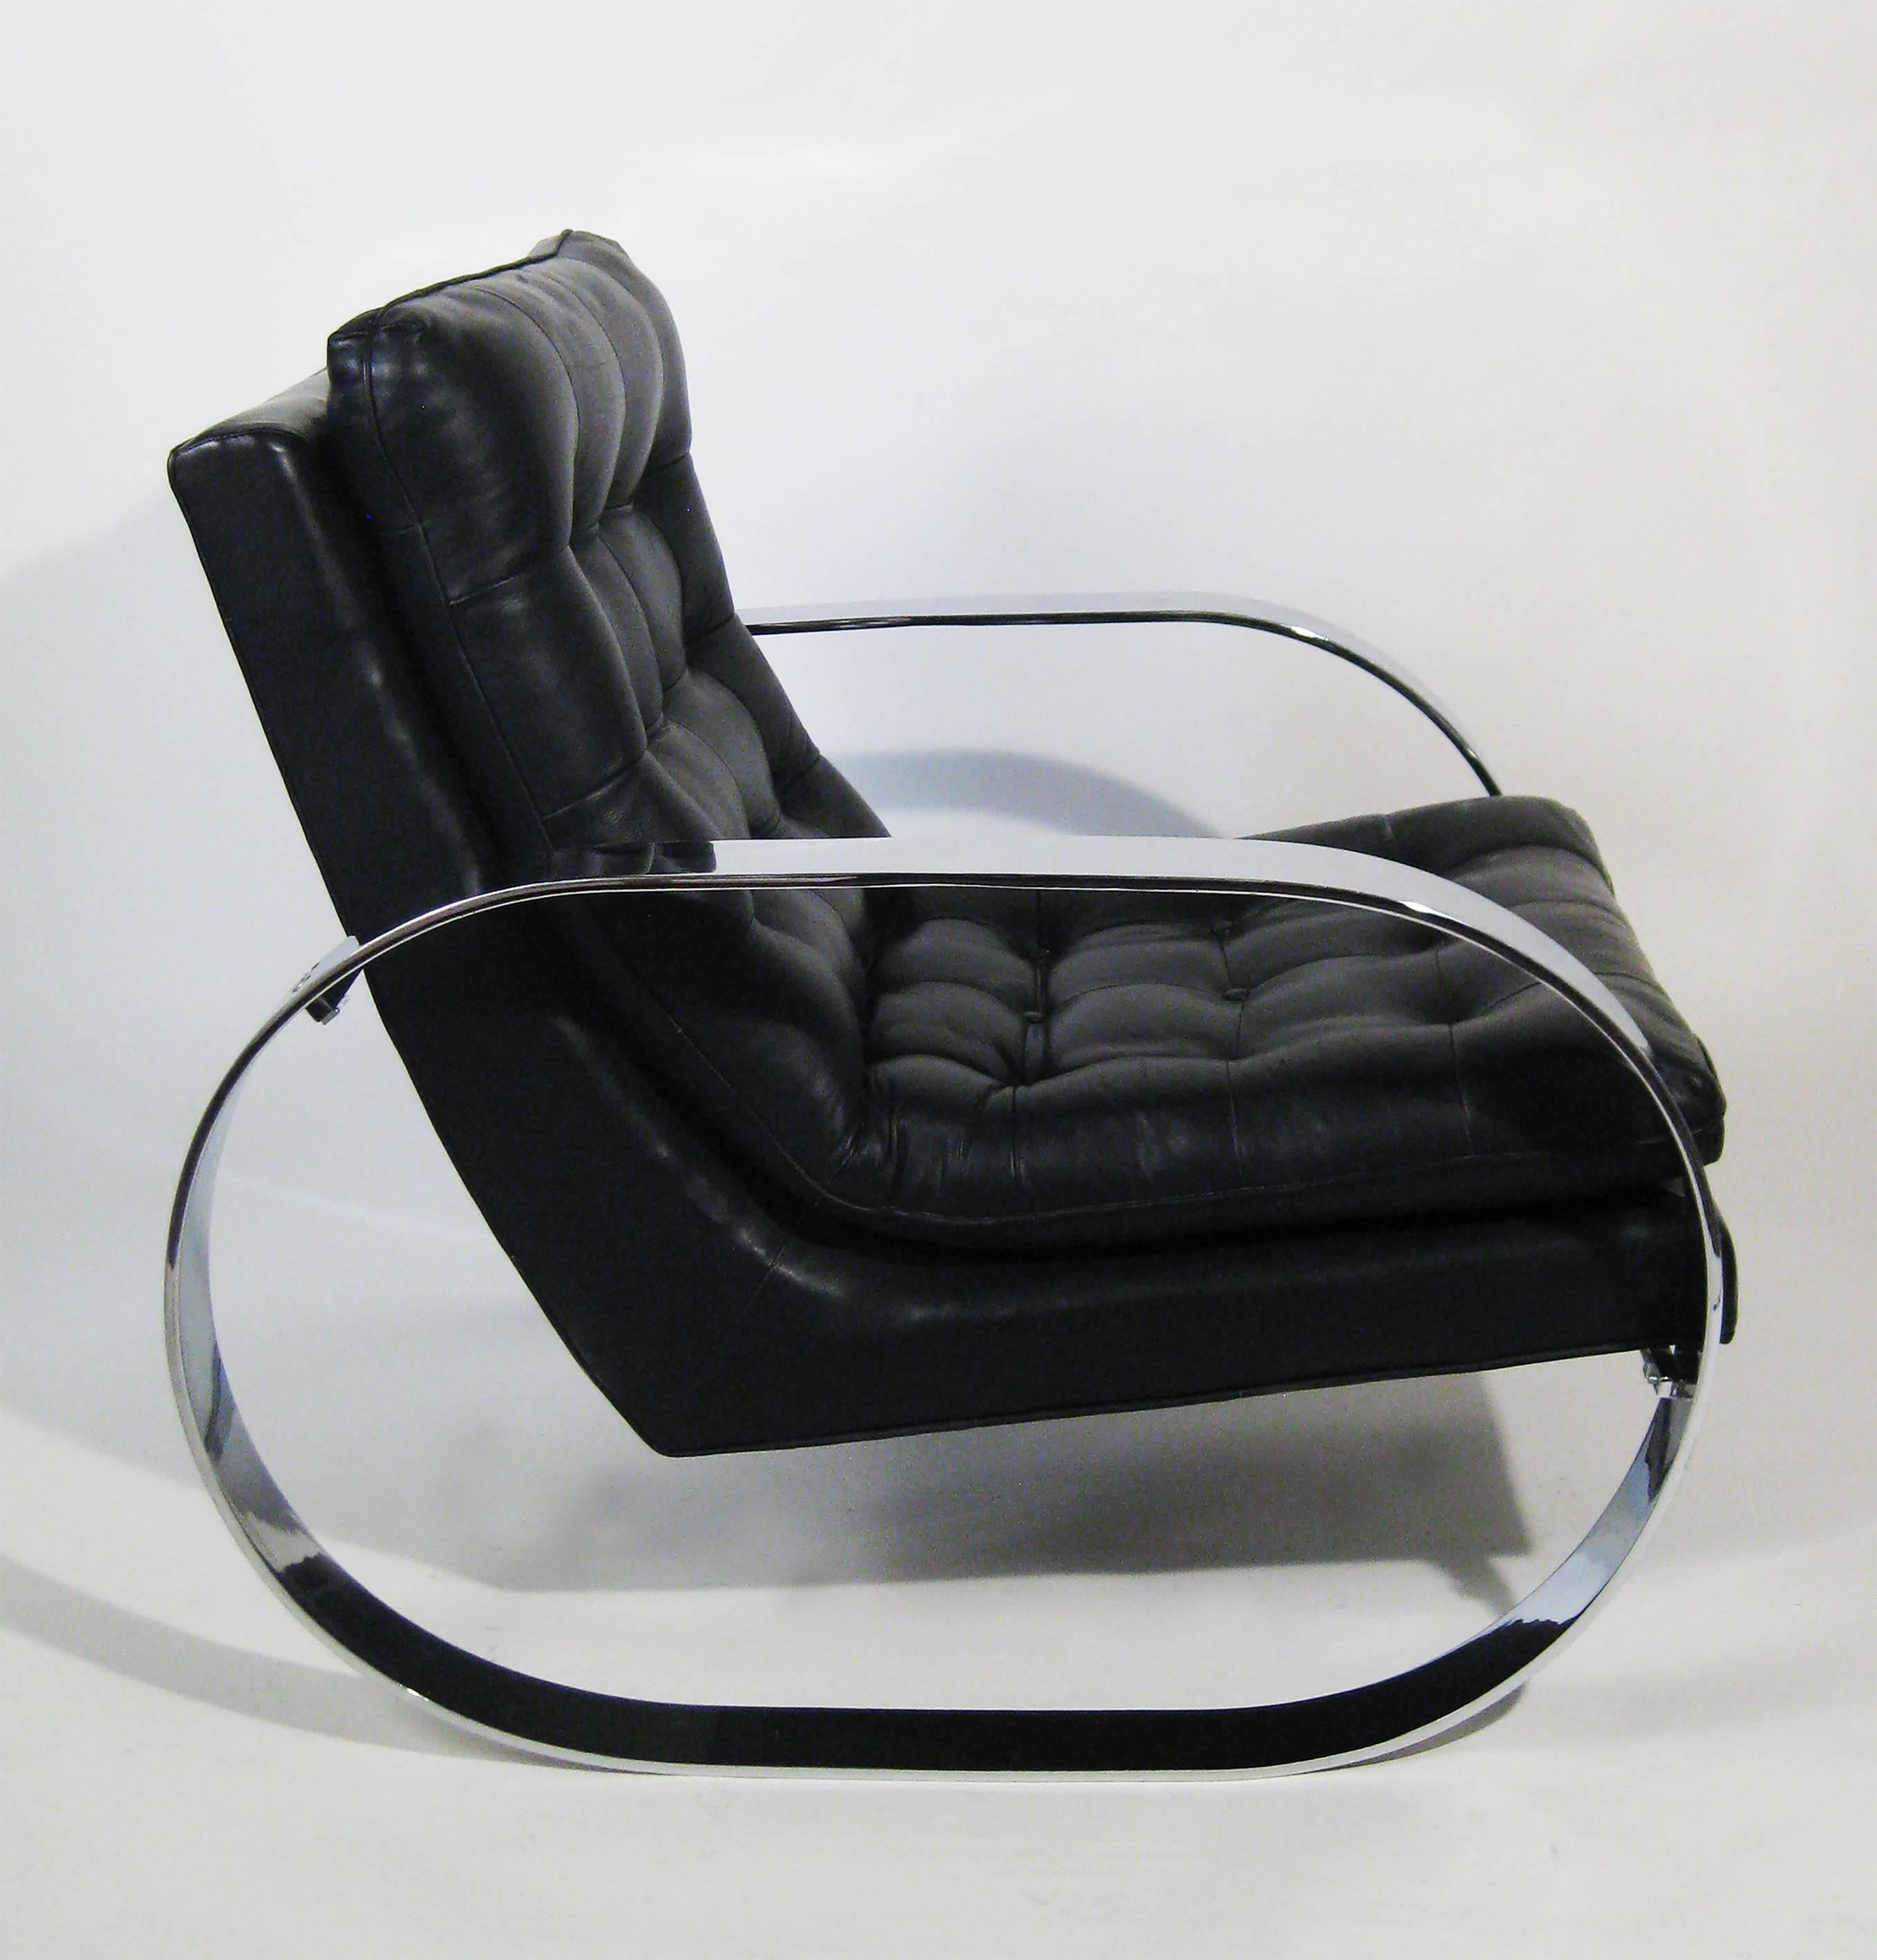 In the 1970s, Industrial design was strongly inspired by the design proposals of the inter-war period. Herman Miller and Knoll started reissuing the designs of Mies Van der Rohe, Marcel Breuer and Le Corbusier. And new Industrial designers began to